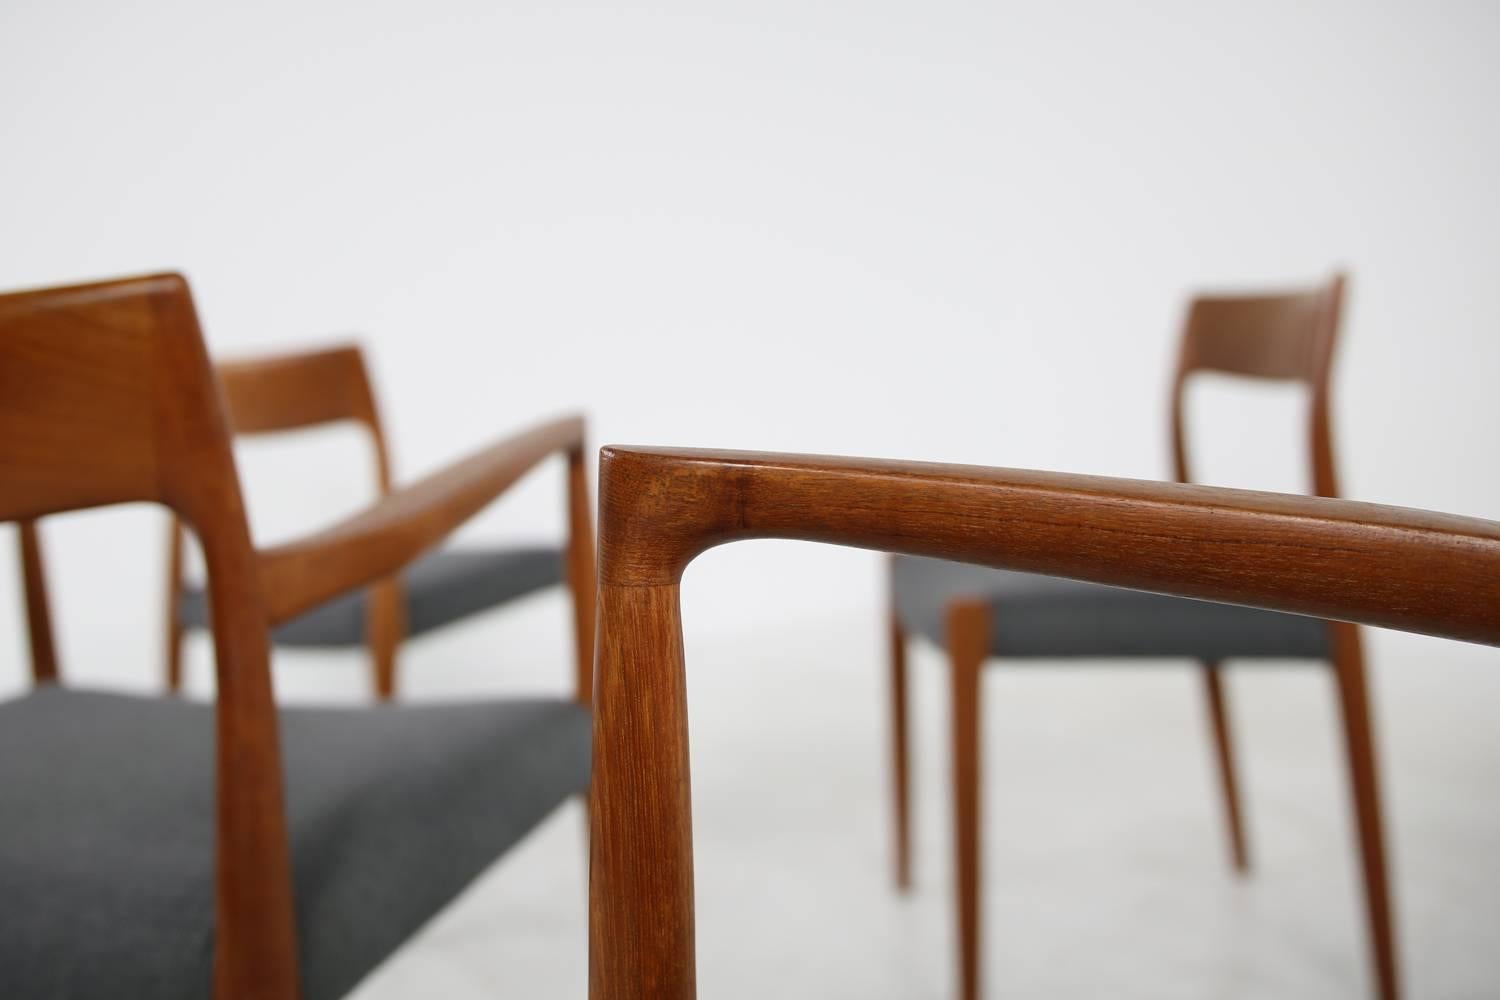 Mid-Century Modern 1960s Danish Teak Dining Room Chairs by Niels O. Moller Mod. 77 and Mod. 57